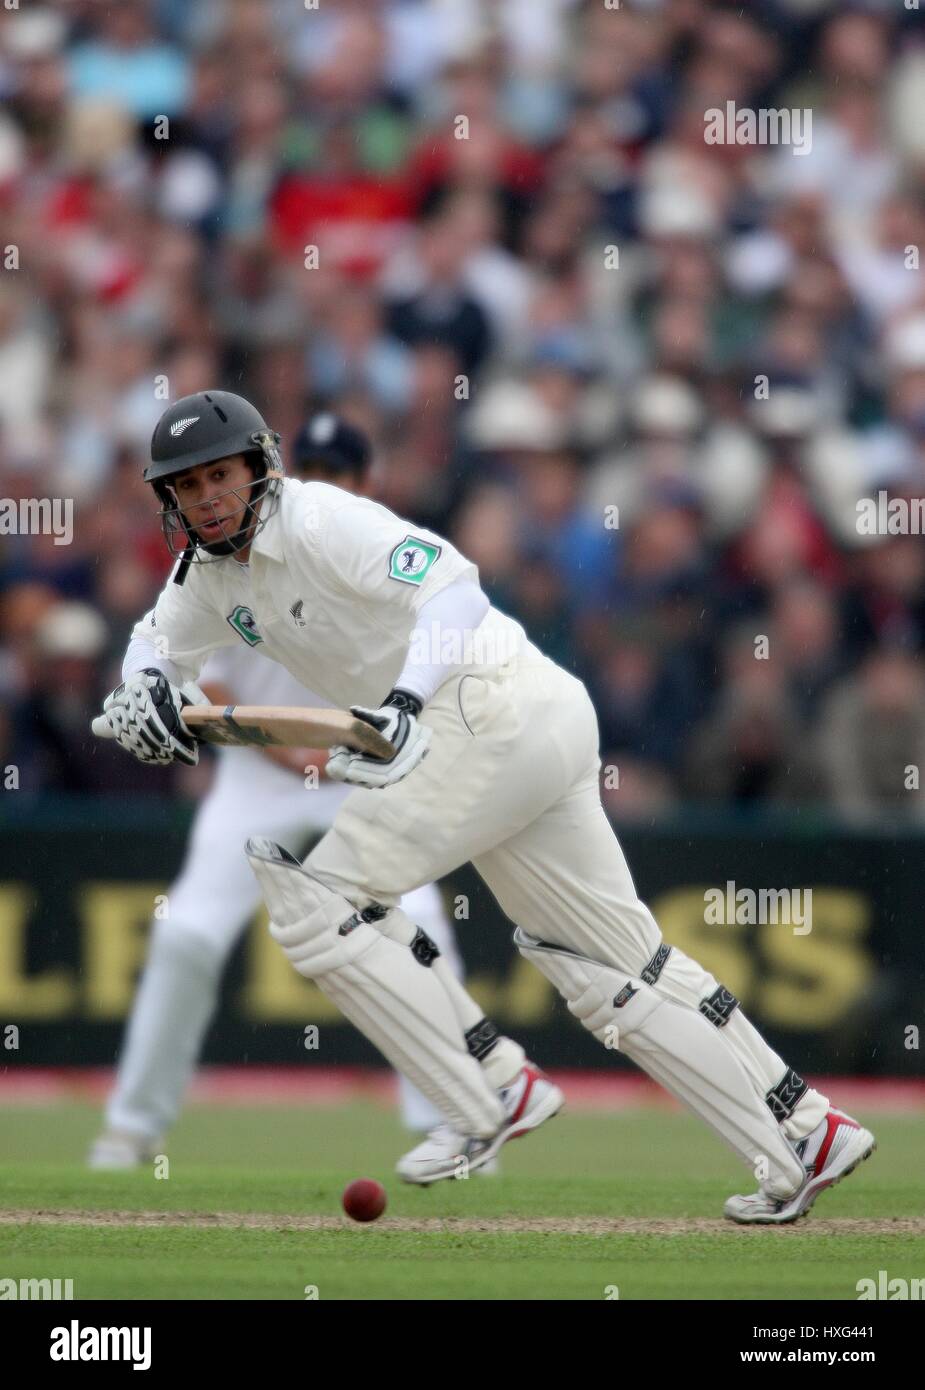 ROSS TAYLOR NEW ZEALAND OLD TRAFFORD MANCHESTER ENGALND 23 May 2008 Stock Photo